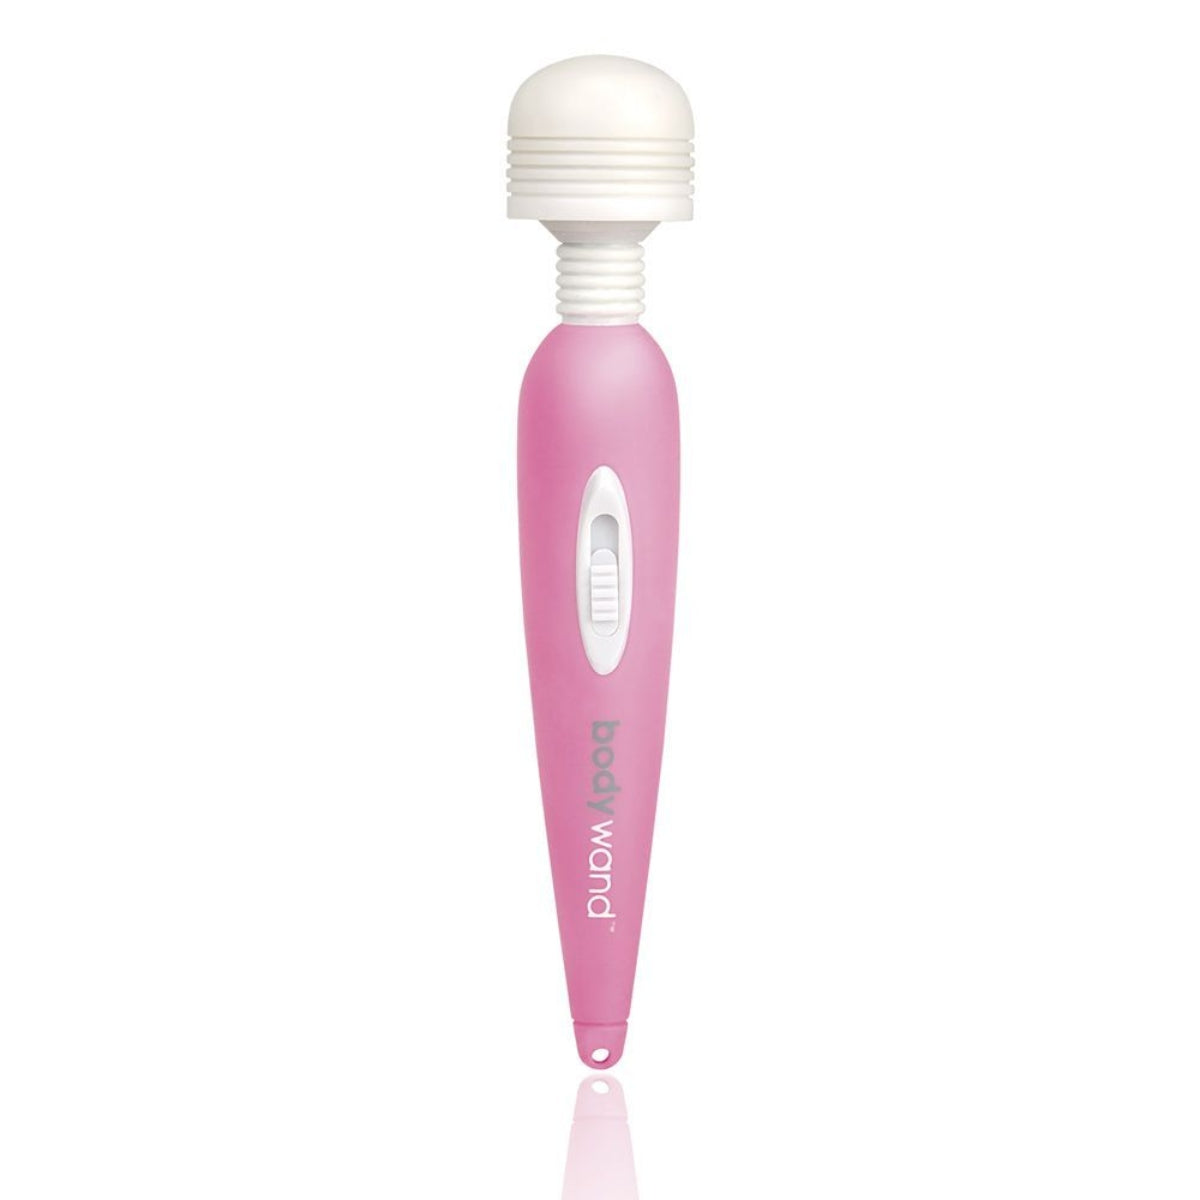 Bodywand Personal Mini Rechargeable Vibrating Wand Pink - Simply Pleasure